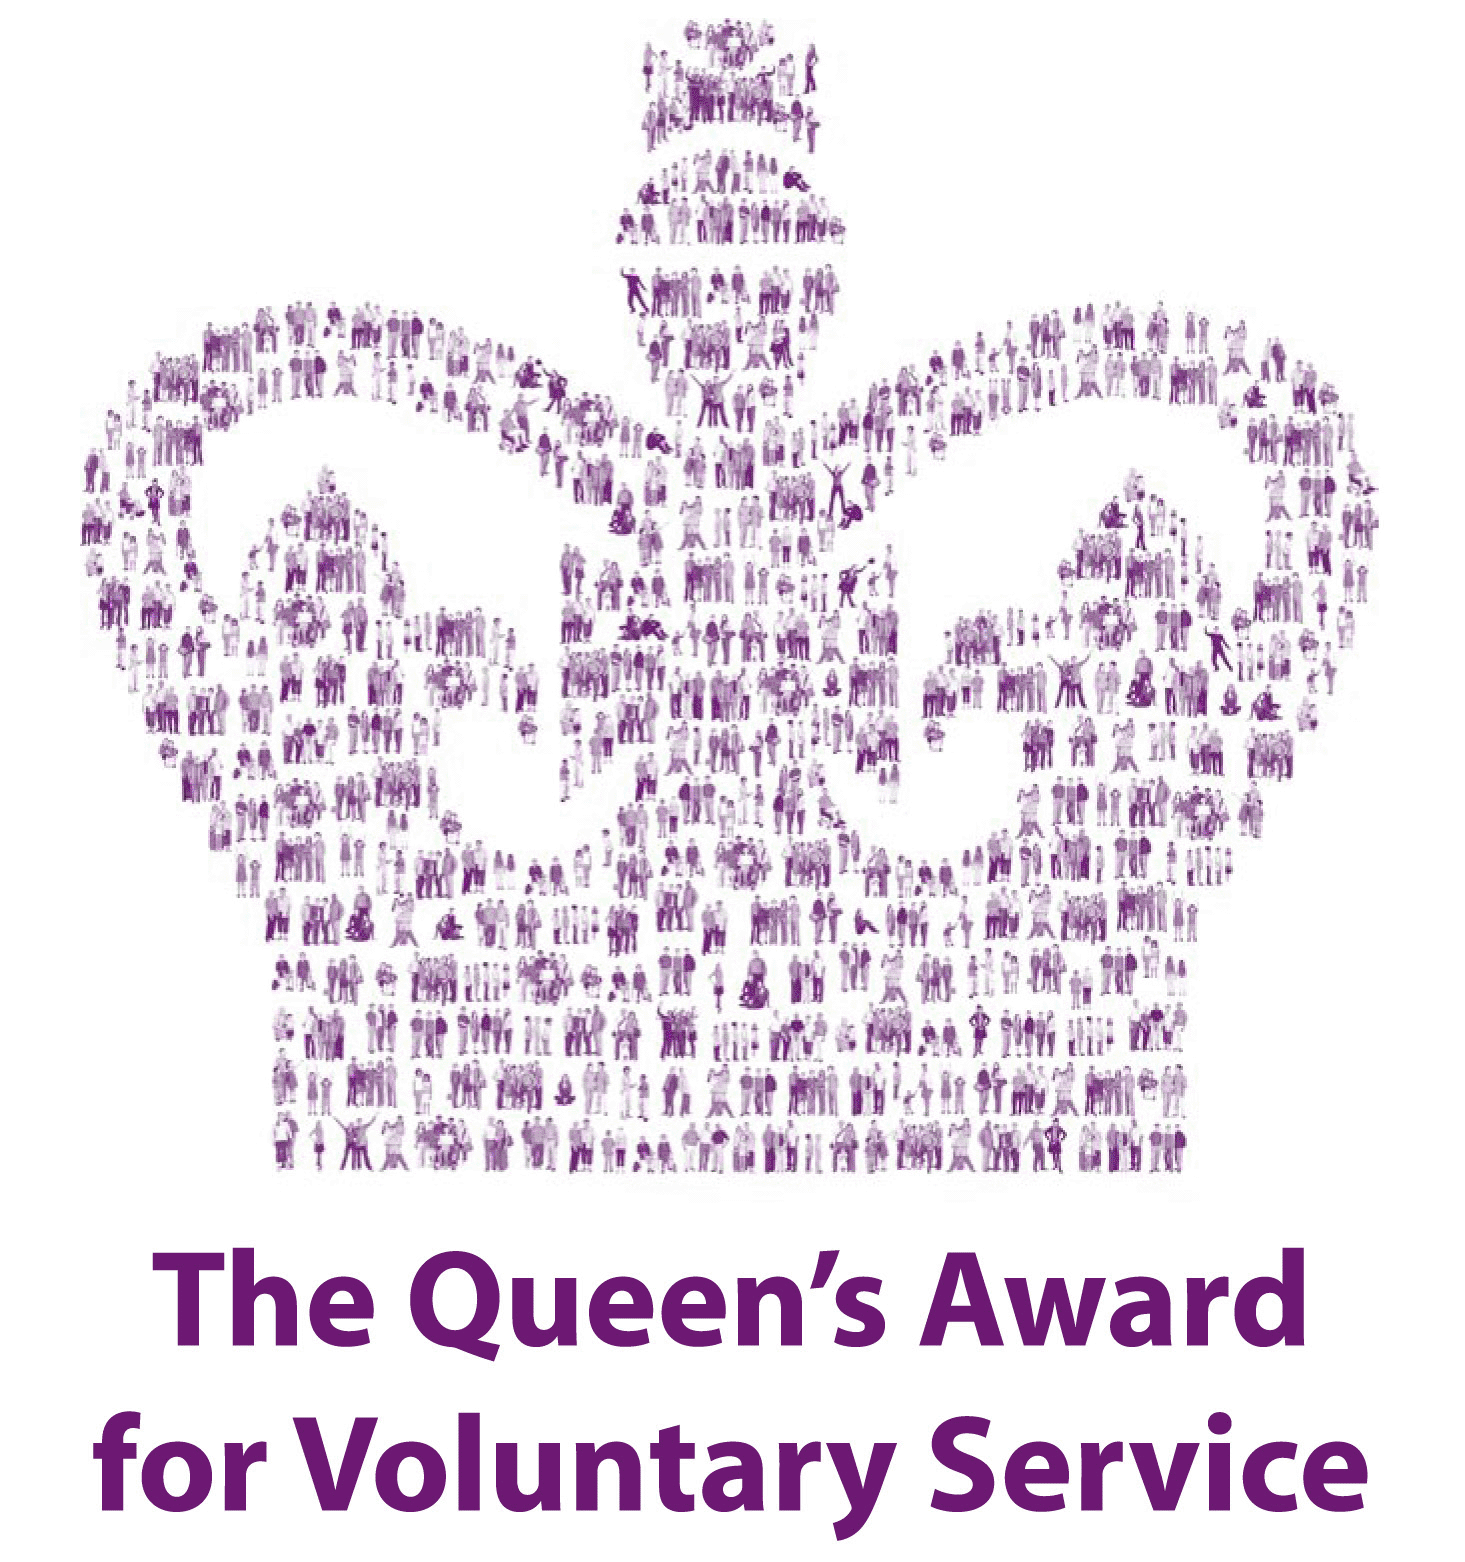 Norfolk winners of The Queen’s Award for Voluntary Service